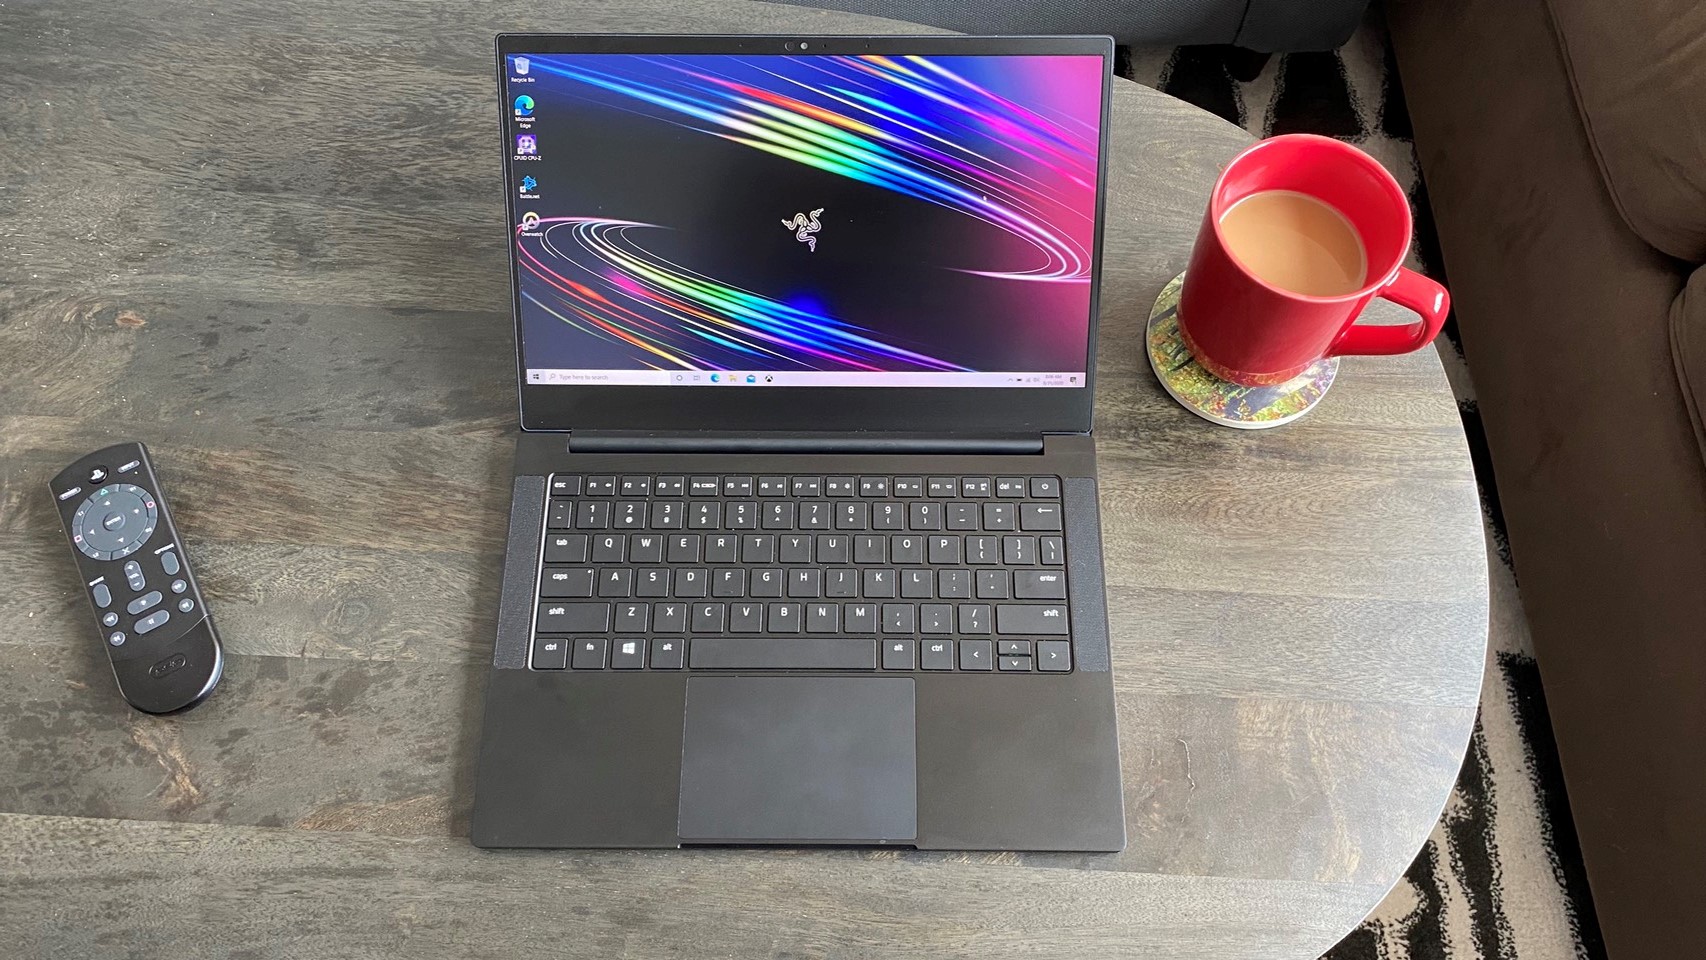 Razer Blade Stealth 13 (2020) Review: Ultrabook in Gaming's